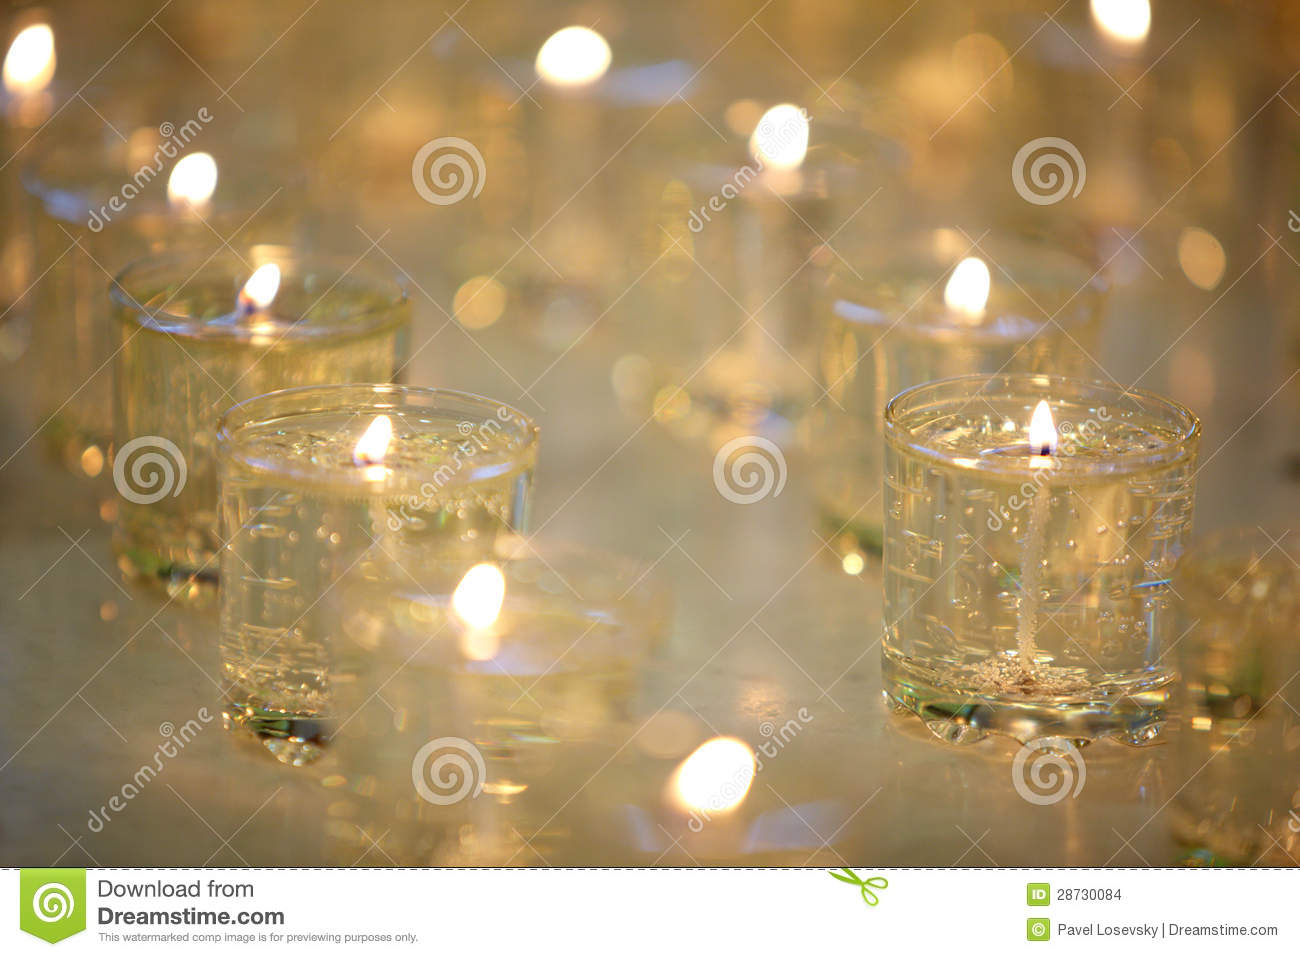 Burning Memorial Candles Stock Images   Image  28730084